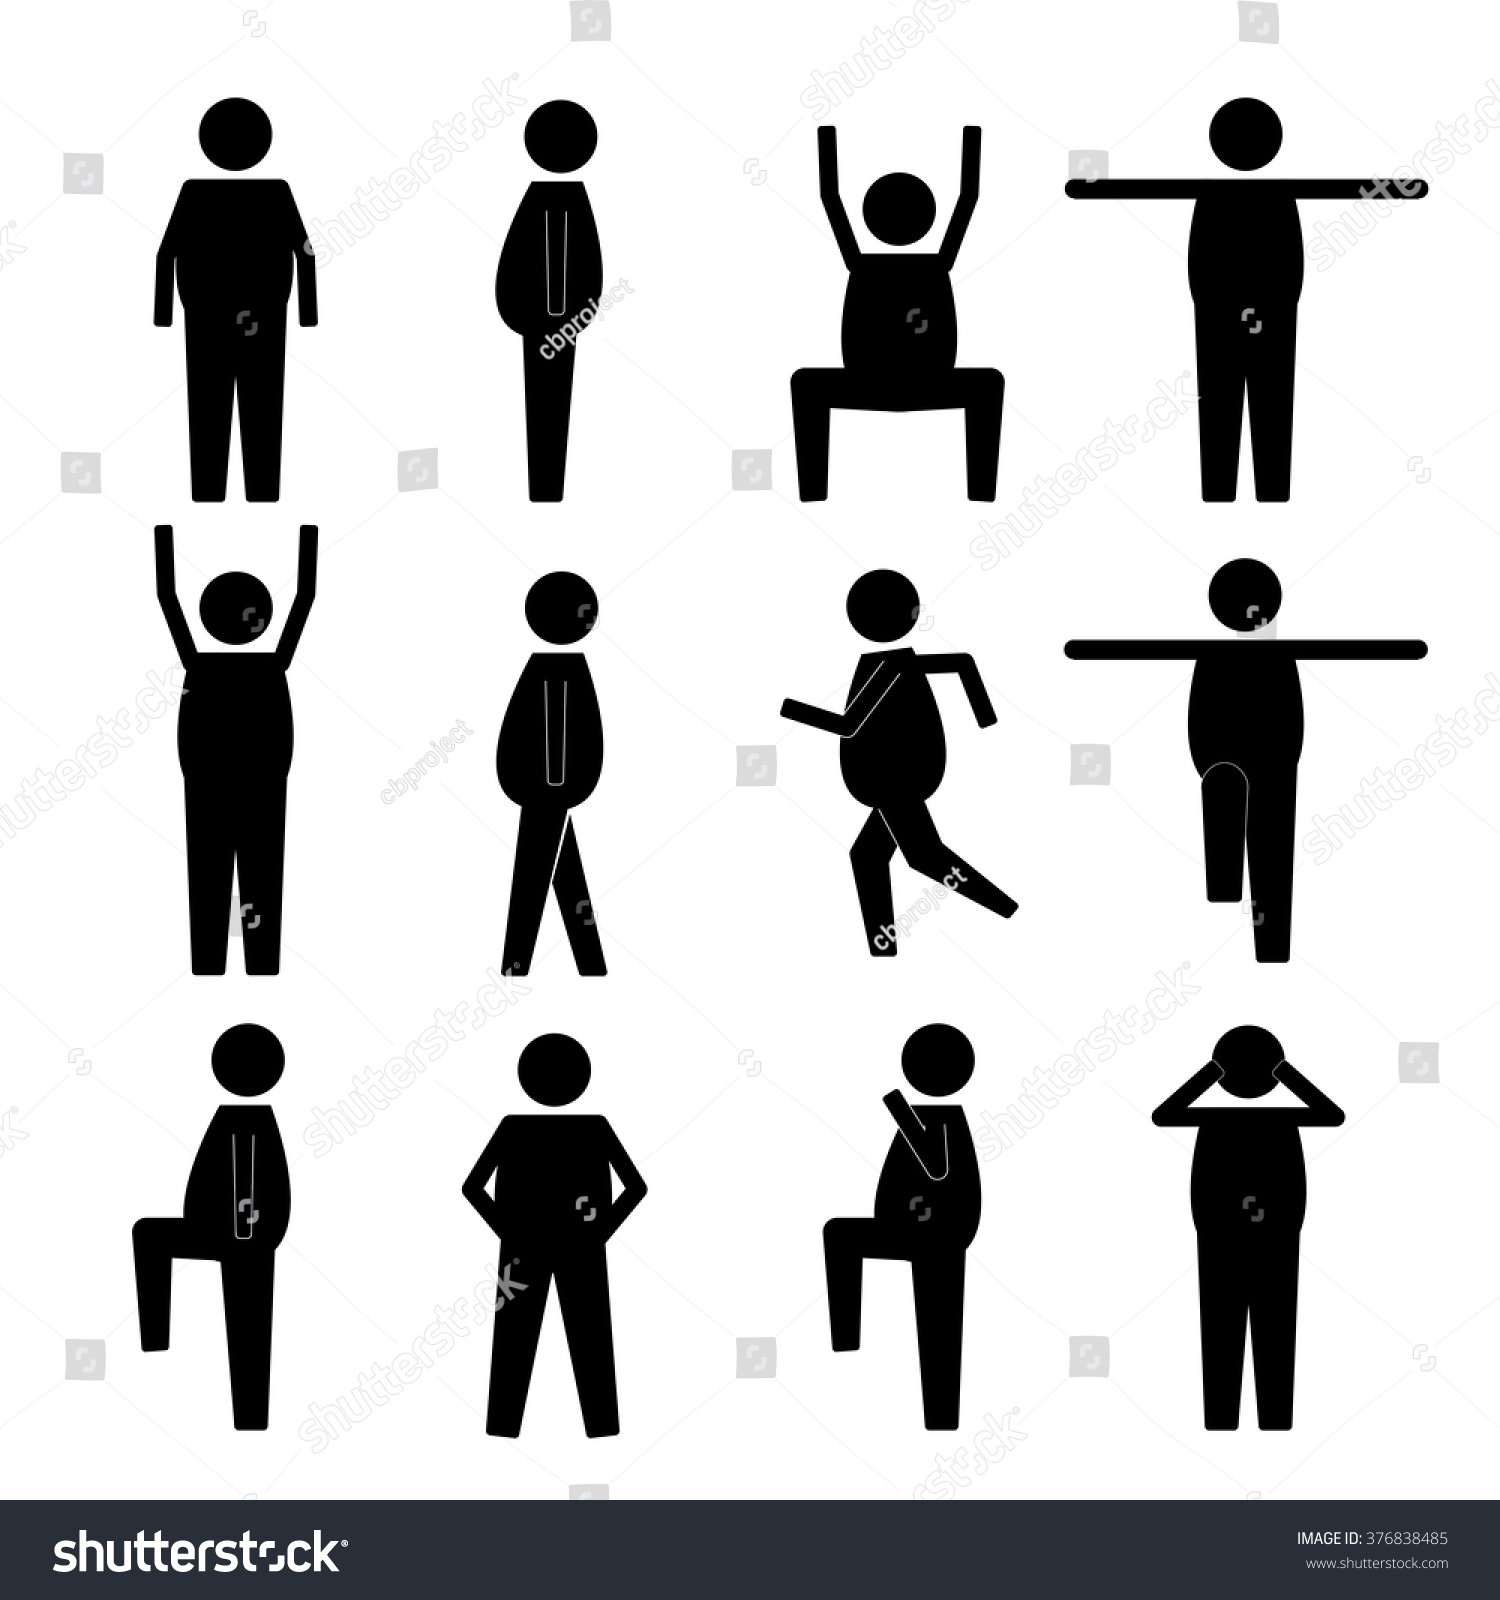 Fat Obese Human Action Poses Postures Stock Vector (Royalty Free ...